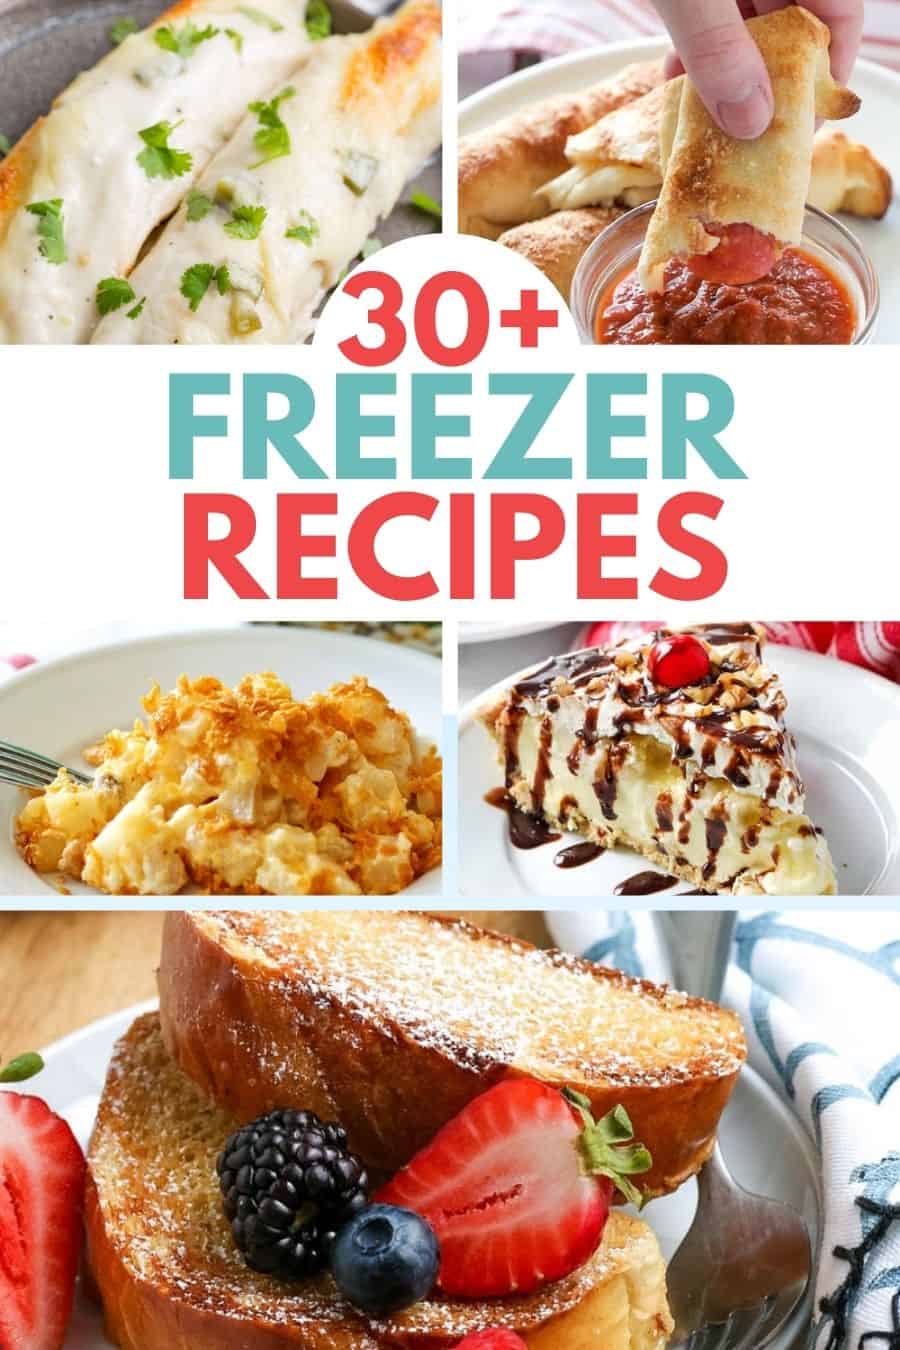 30+ Freezer Cooking Recipes You Can Make Now and Eat Later